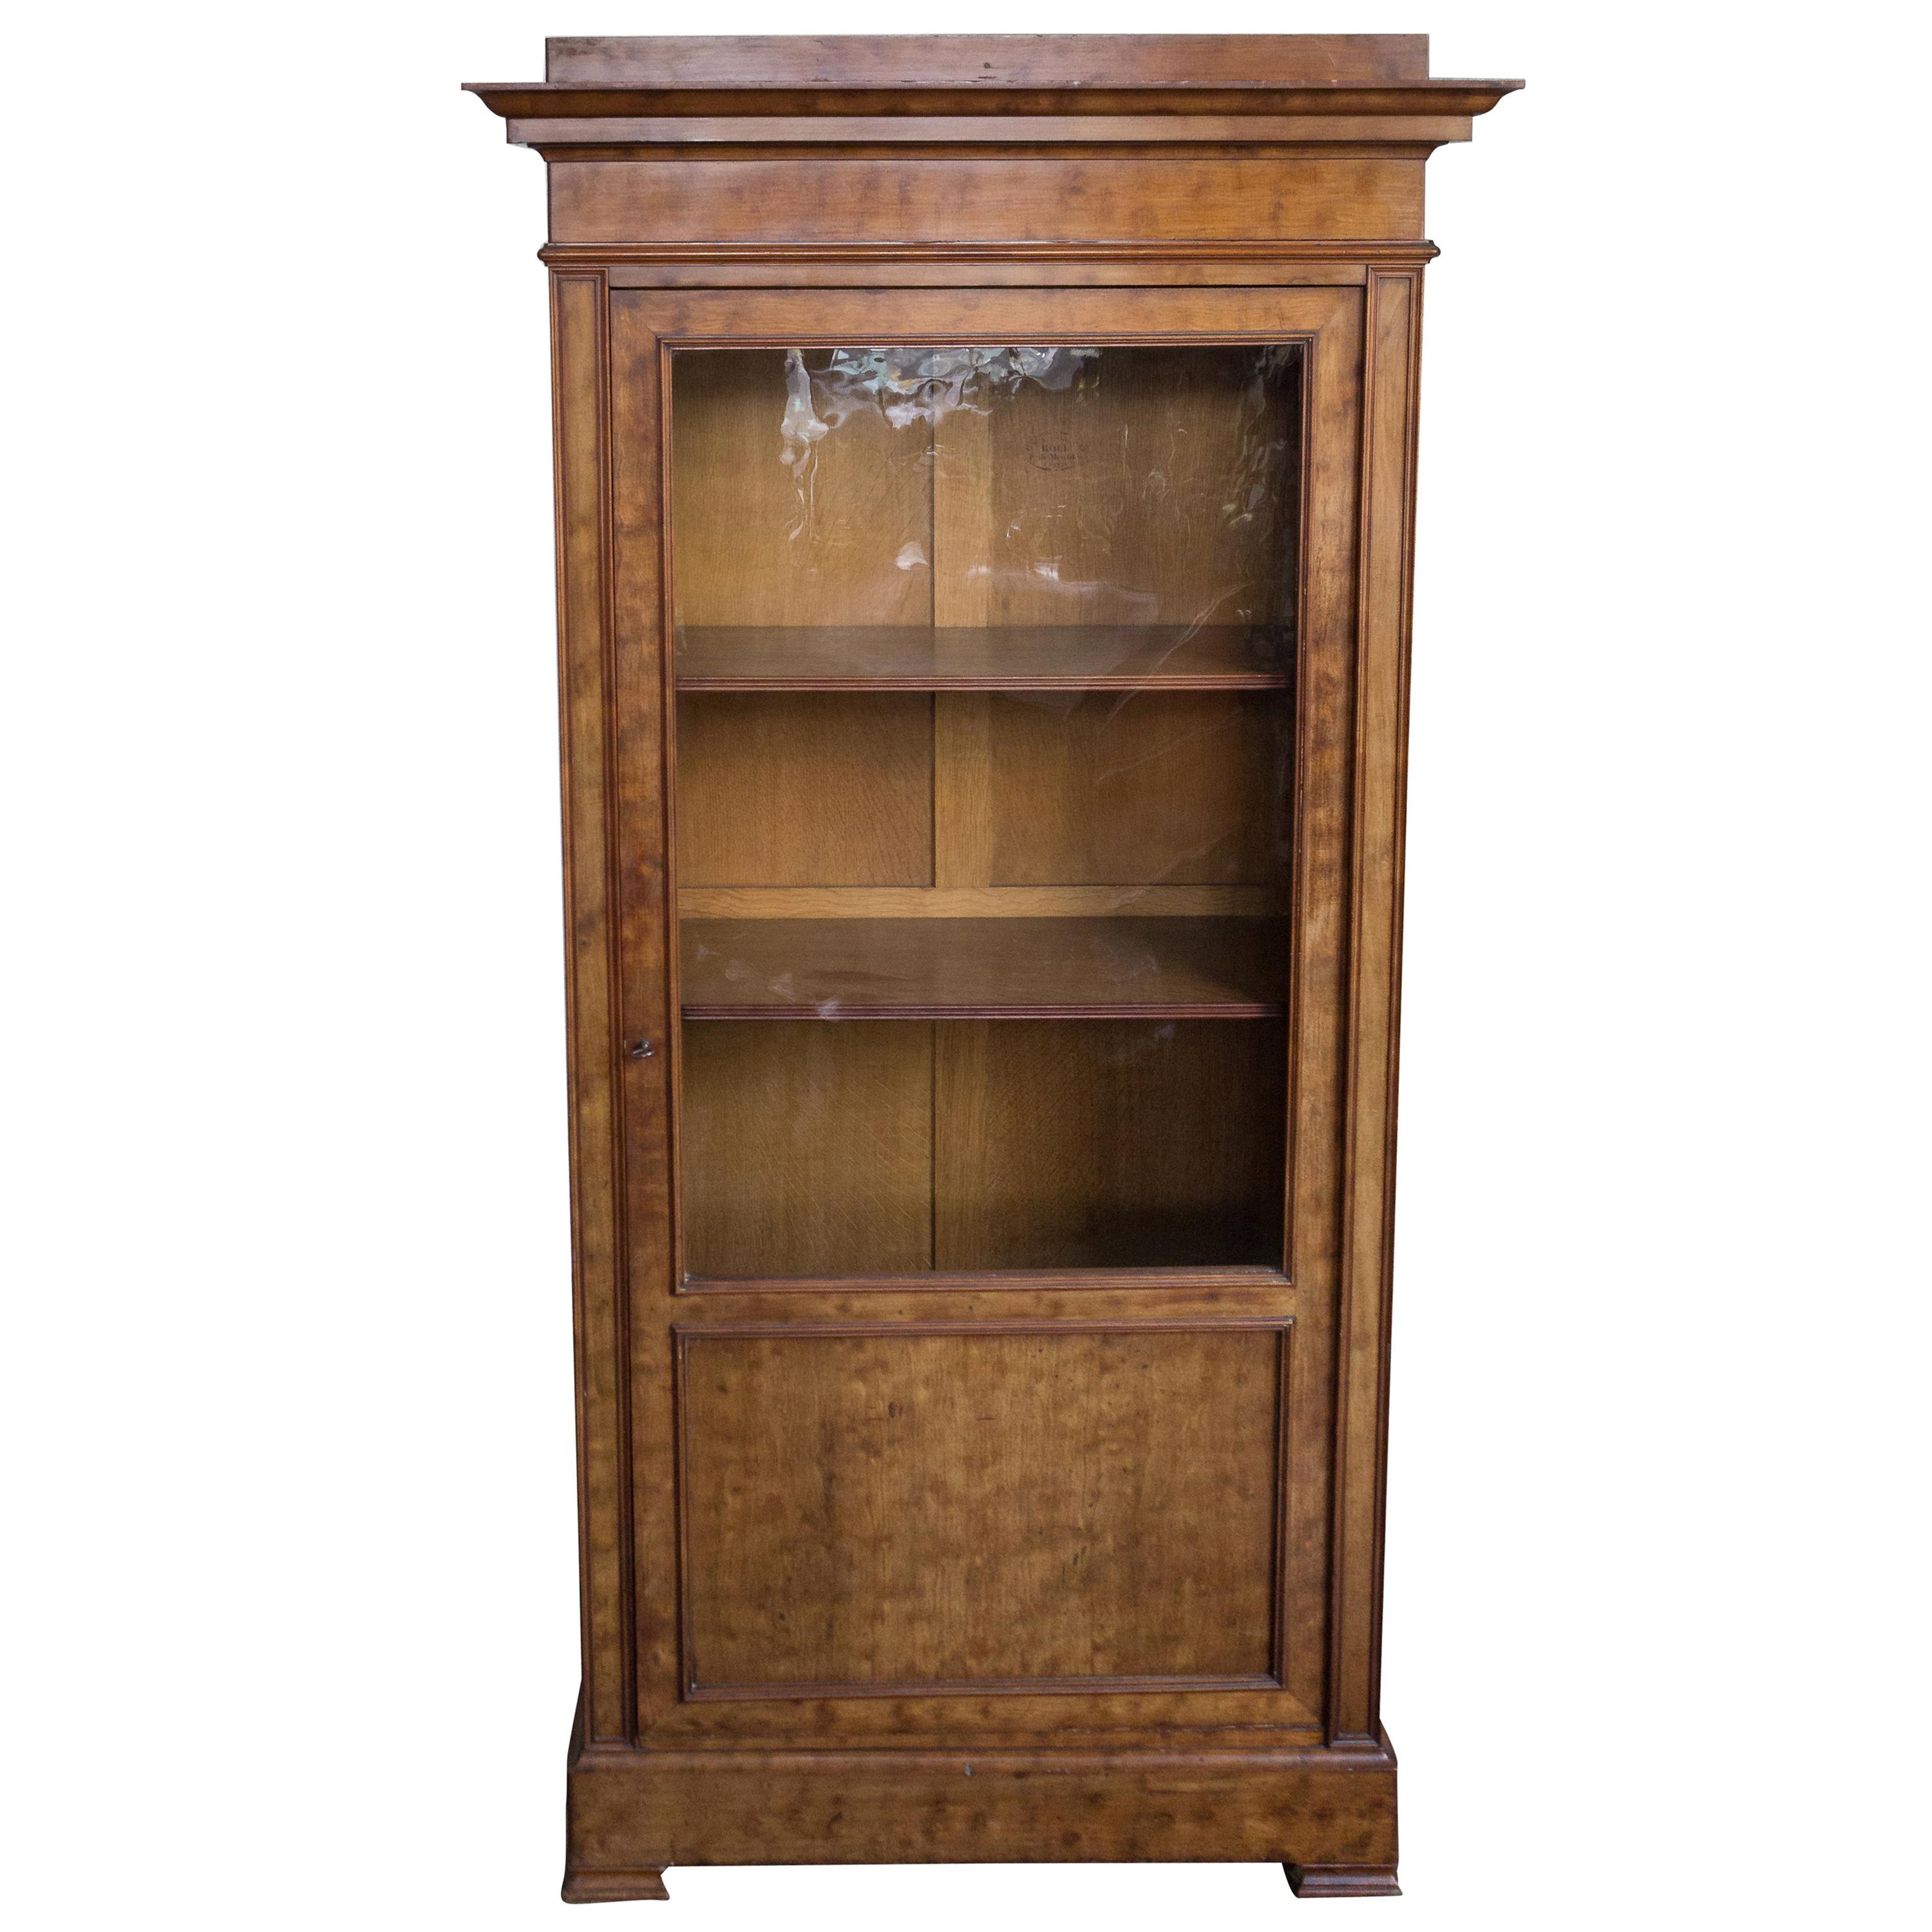 French 19th Century Walnut Bookcase with Original Glass Door